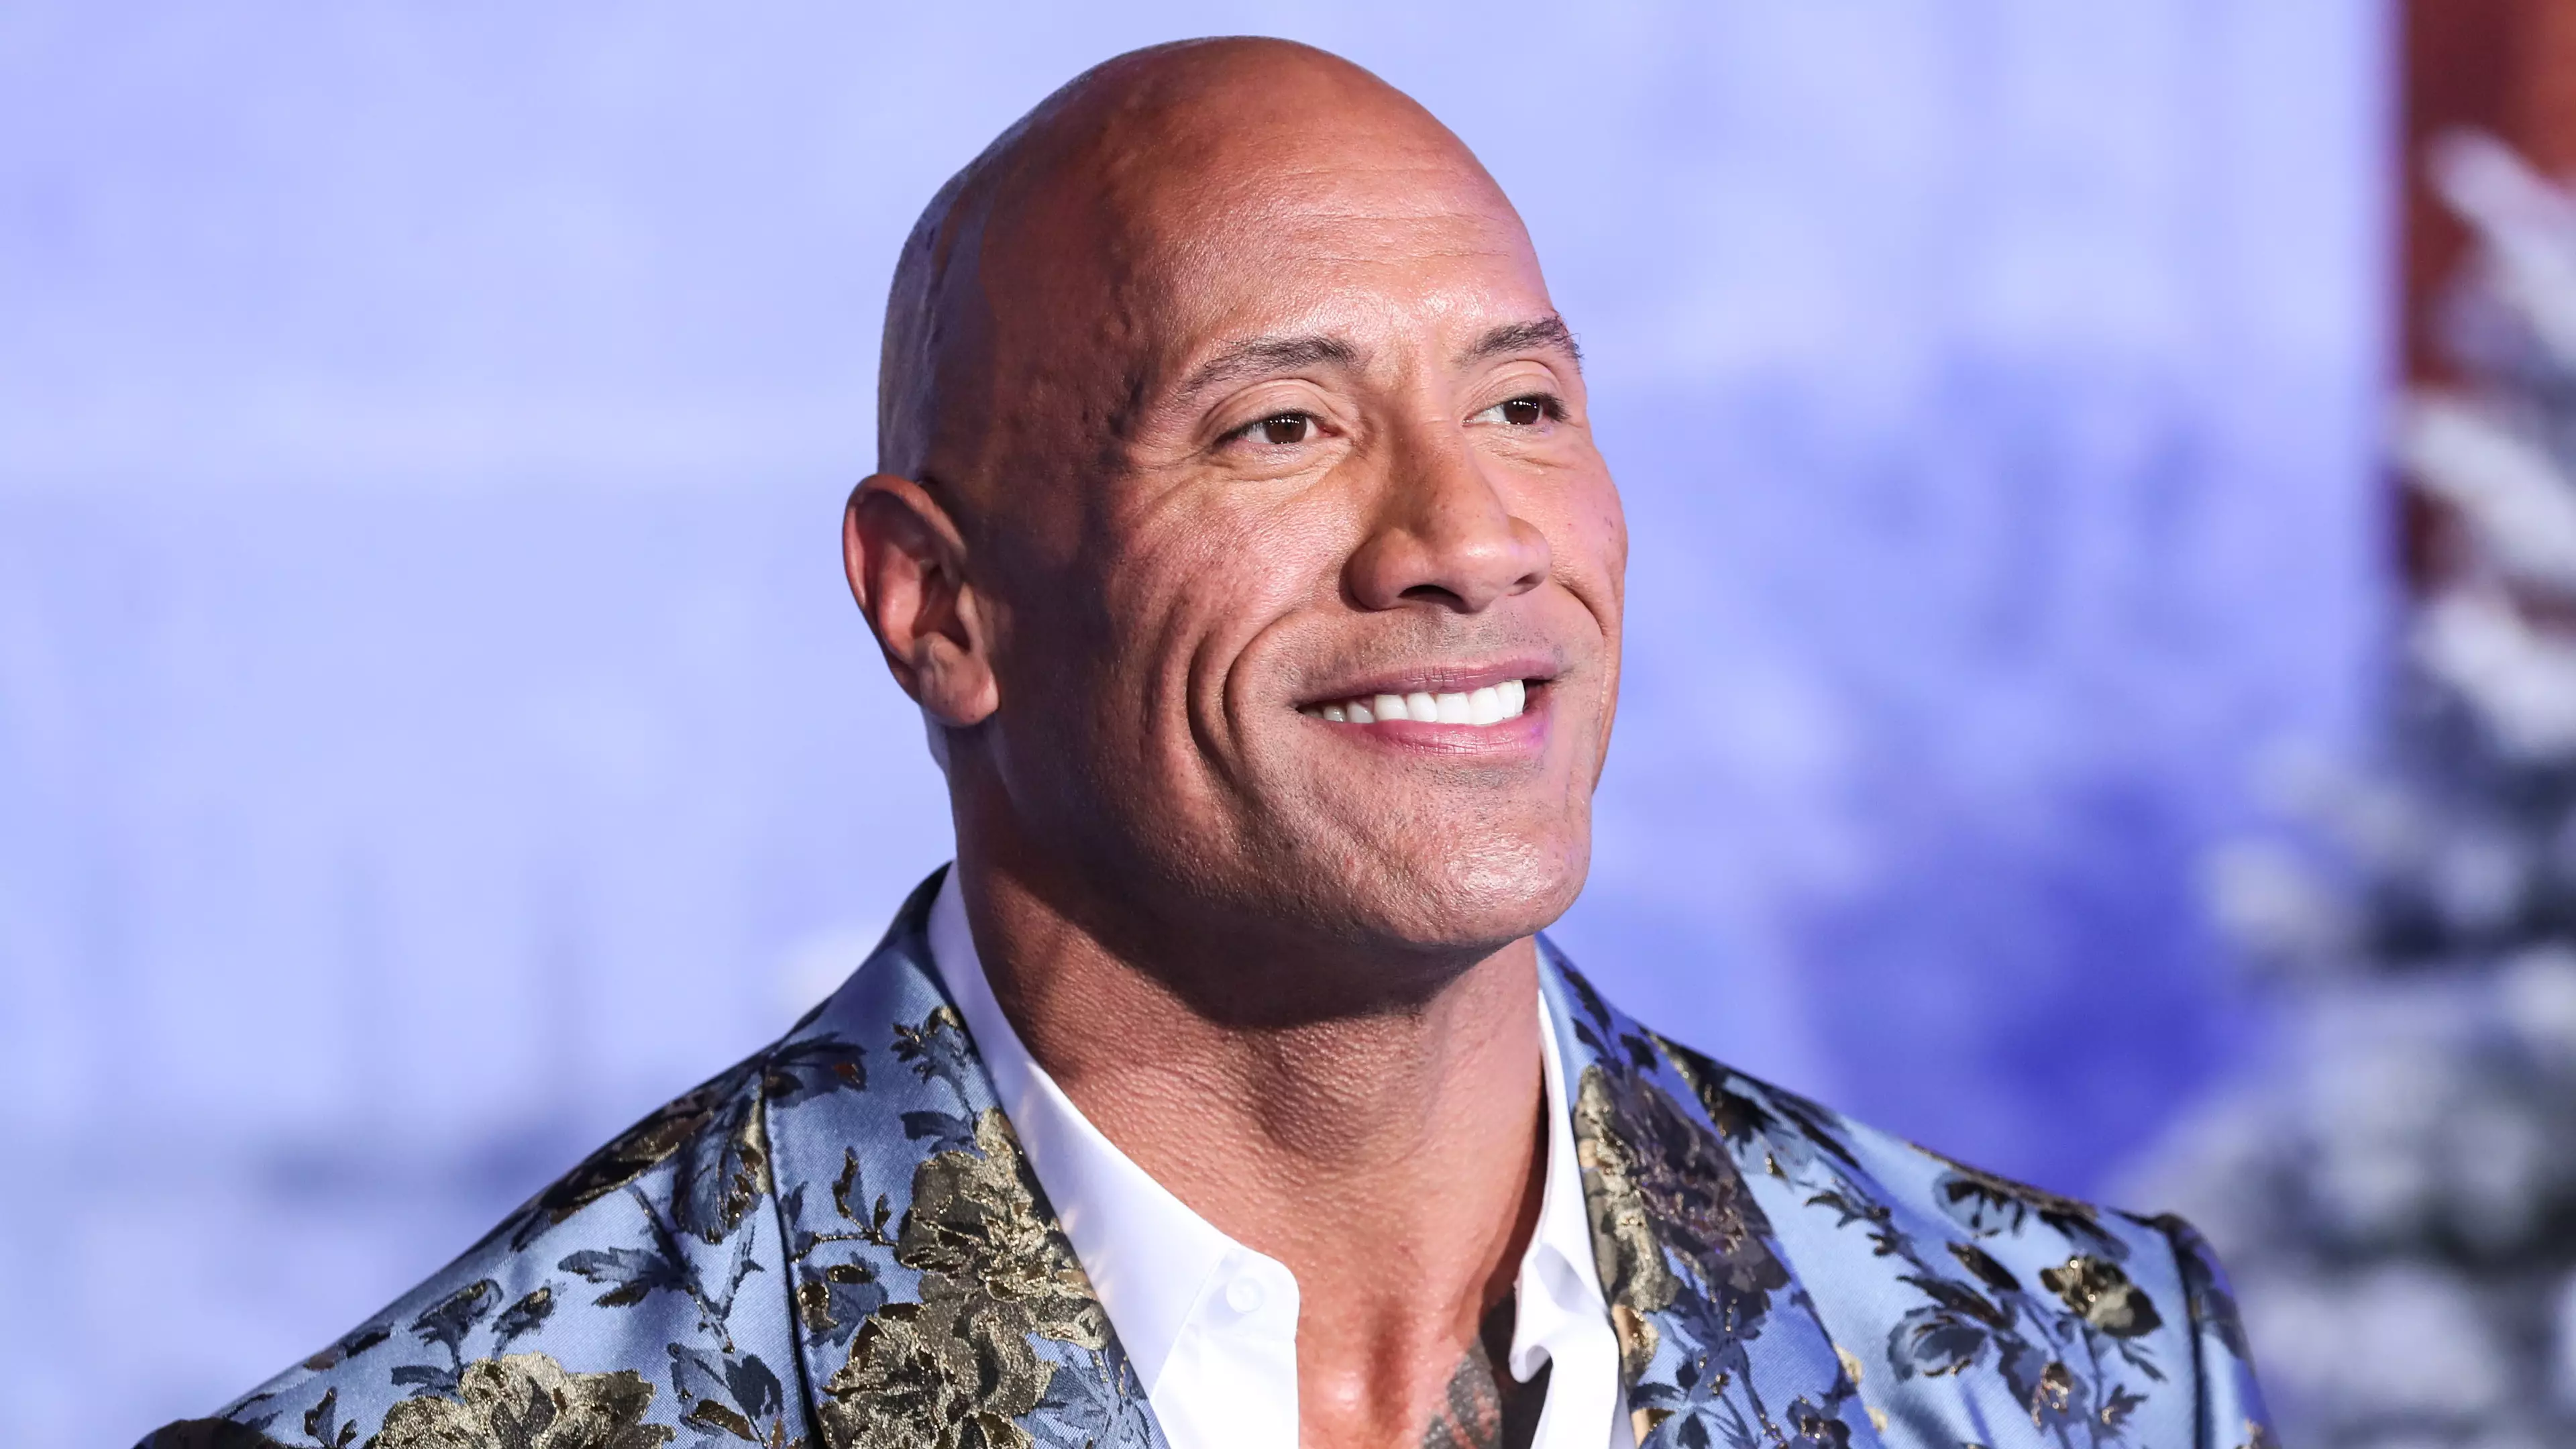 Dwayne Johnson Had Just $7 In His Pocket Before Signing With World Wrestling Federation 